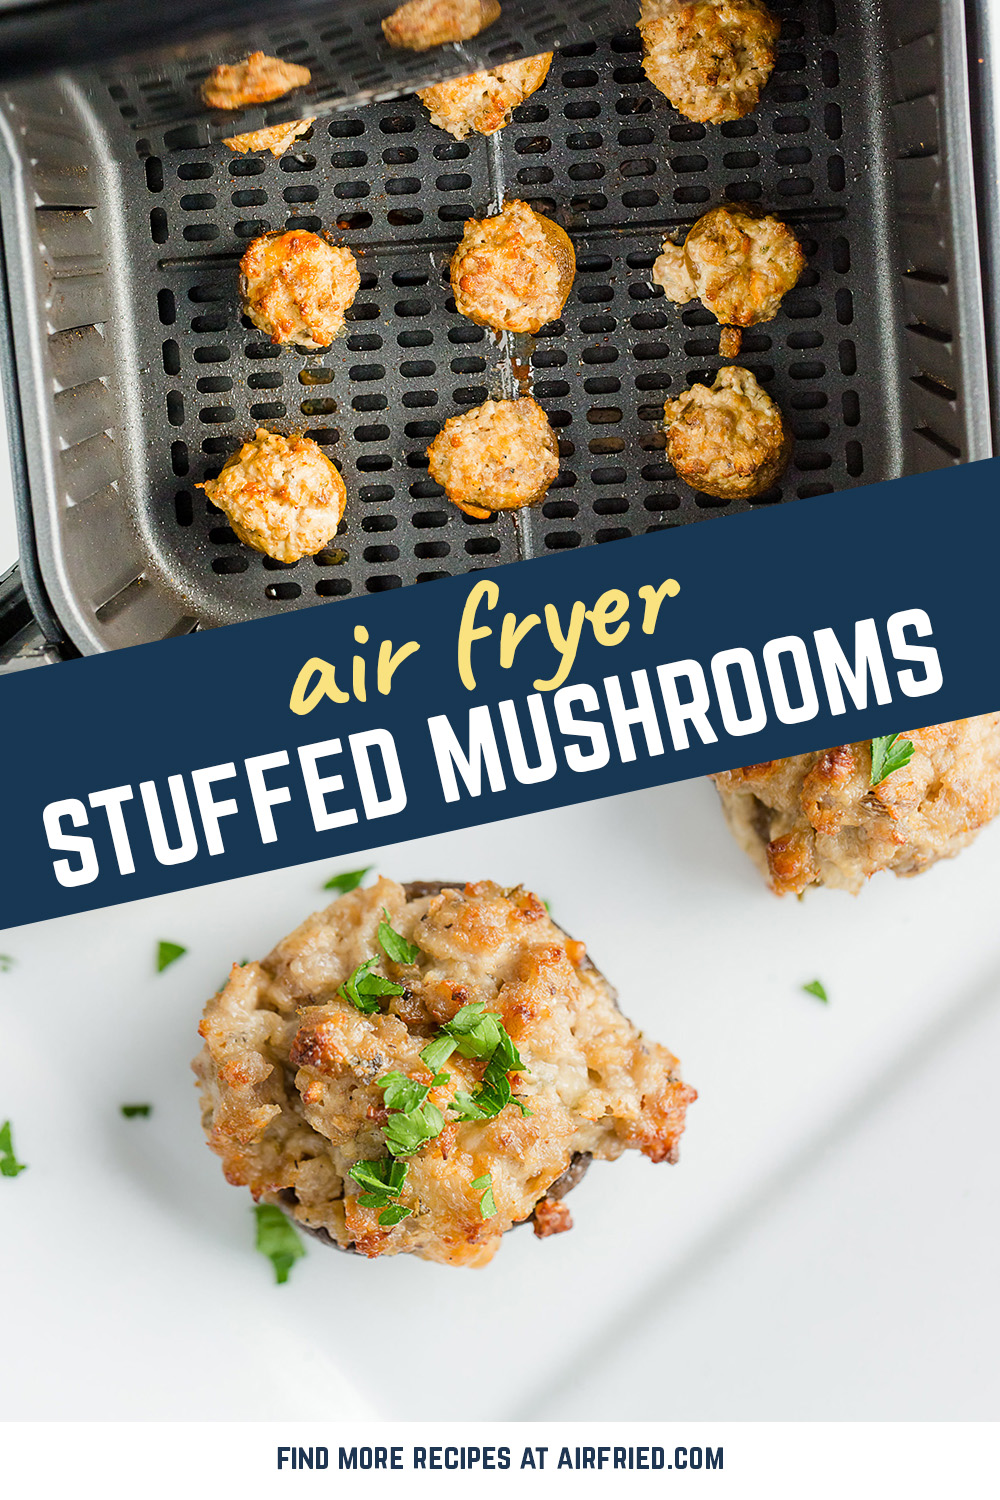 These air fried mushrooms are packed with cream cheese, sausage, and parmesan cheese for a great unique appetizer! #airfryer #recipes #snacks